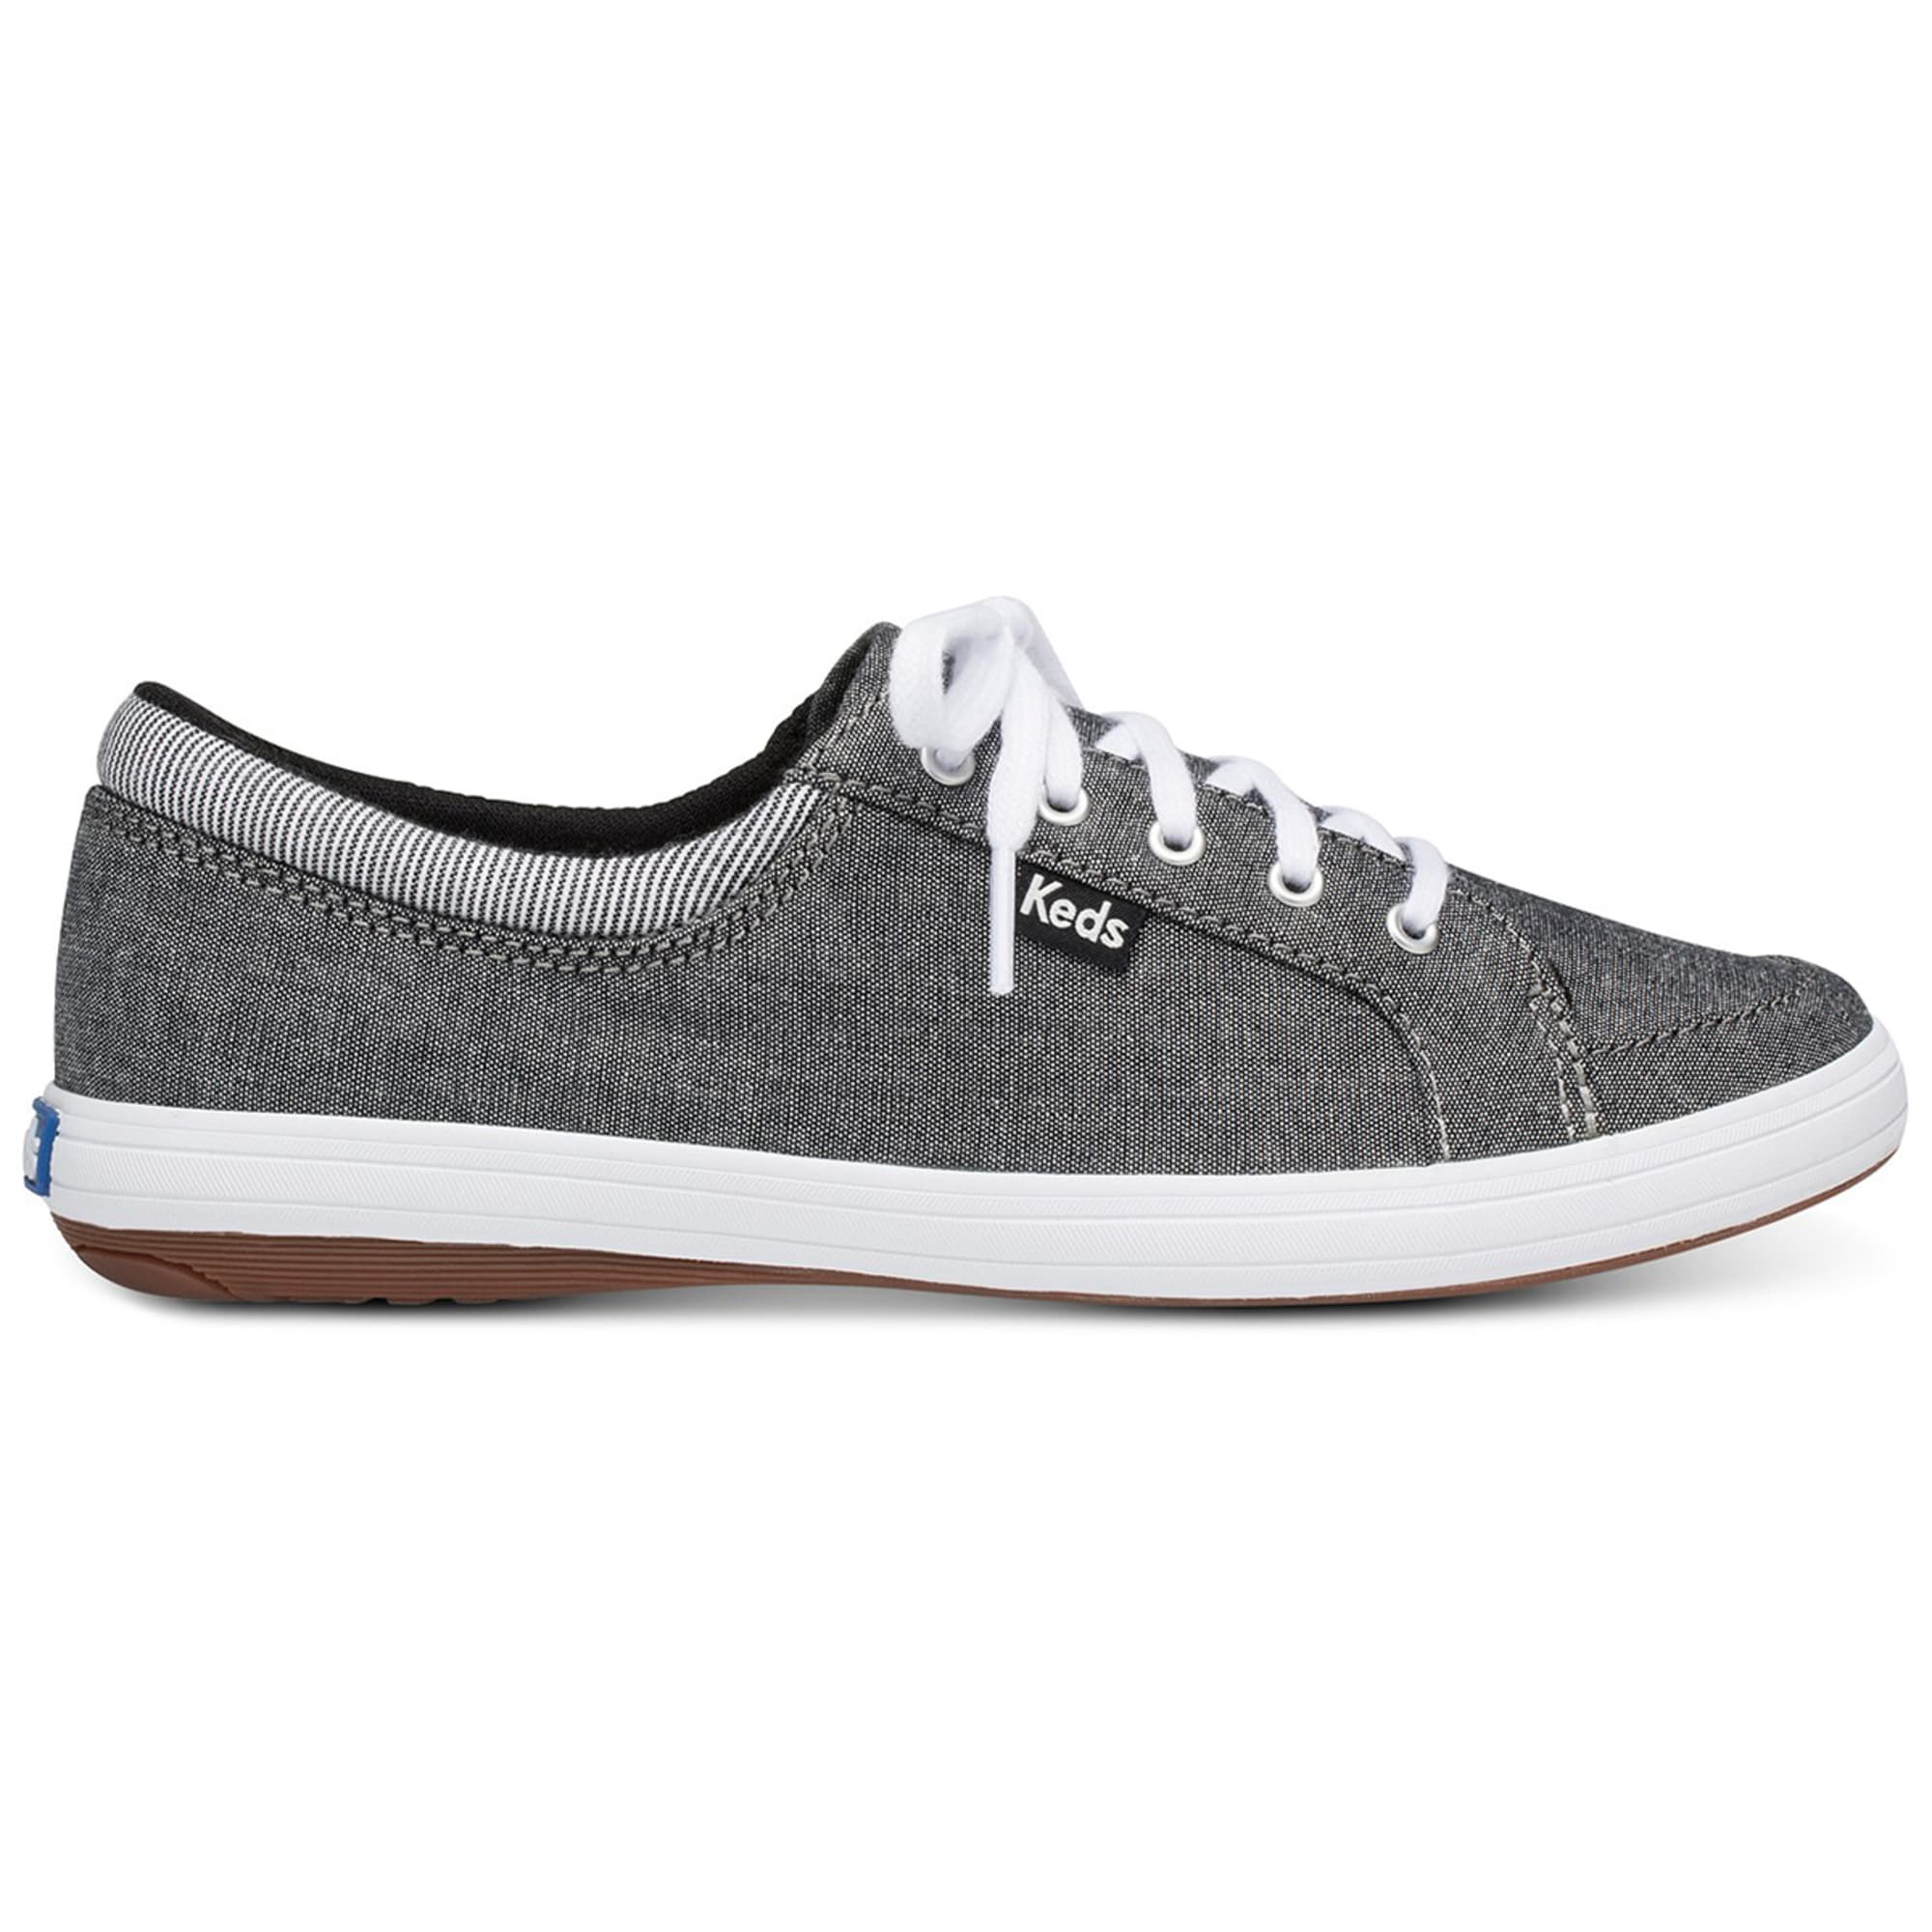 keds tour chambray sneakers